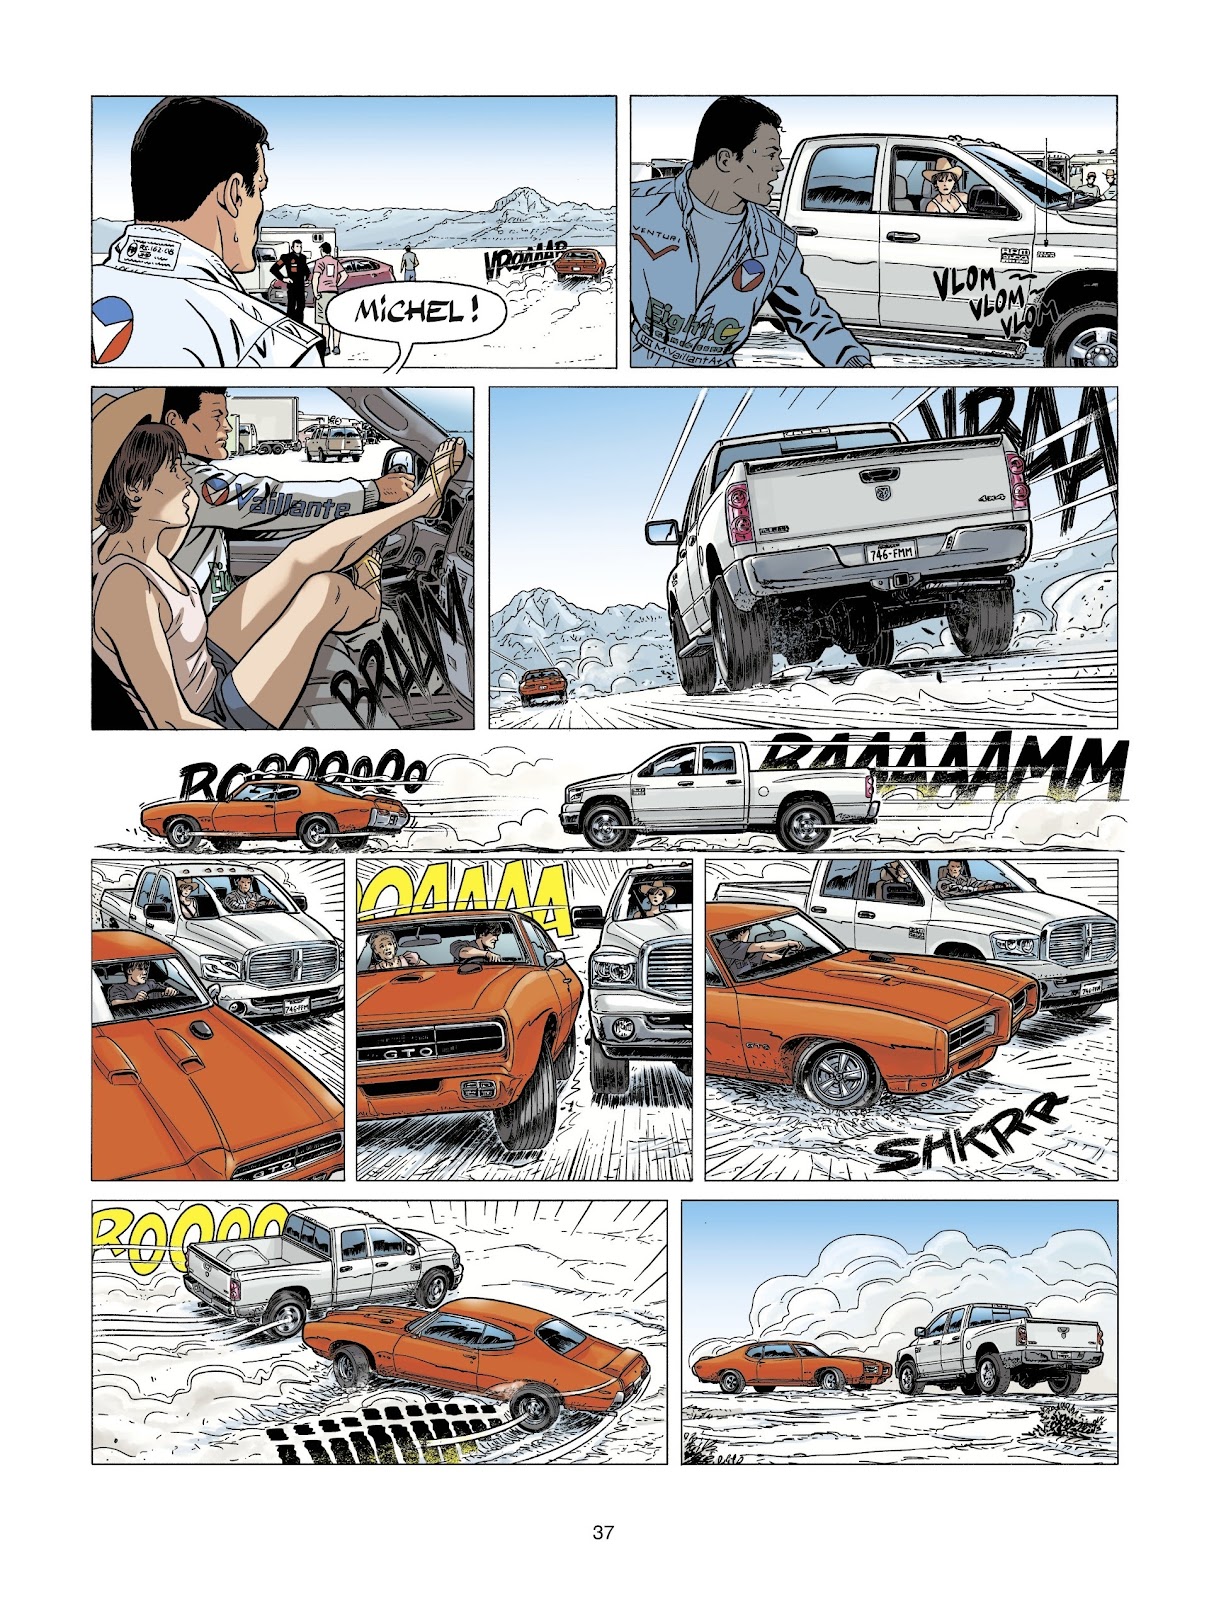 Michel Vaillant issue 2 - Page 37